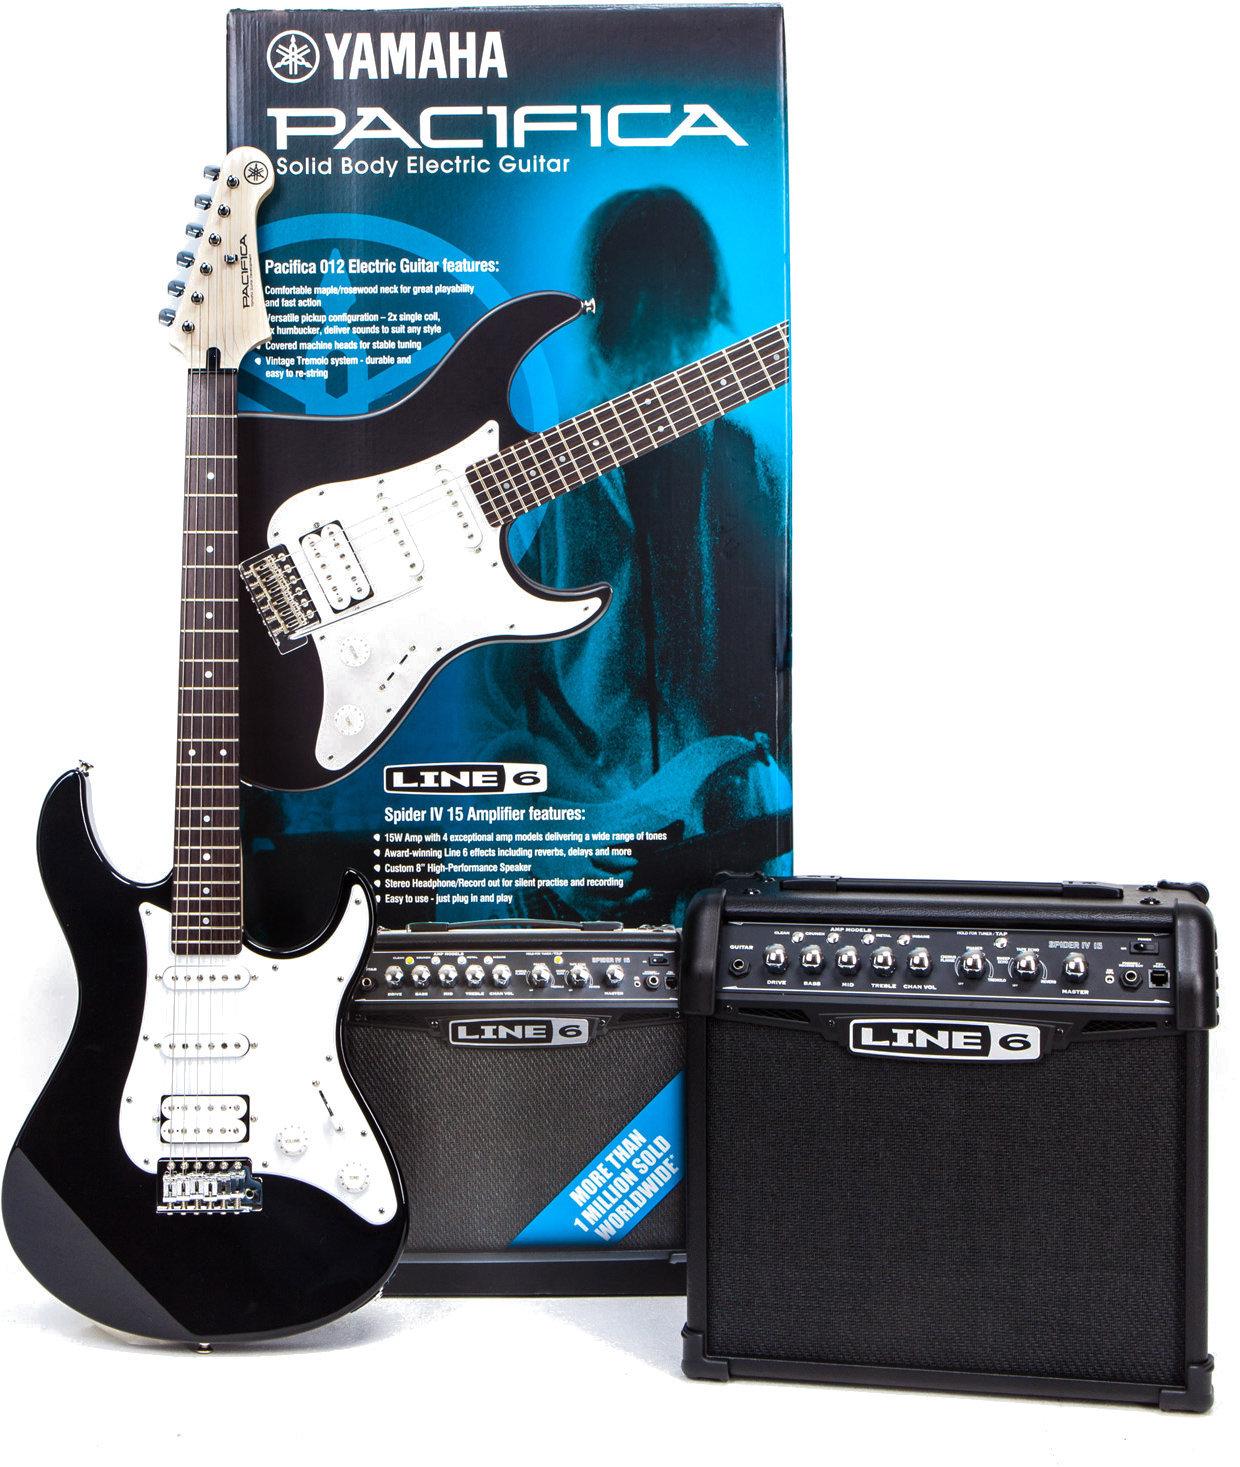 Electric guitar Yamaha Pacifica 012 & Spider V 20